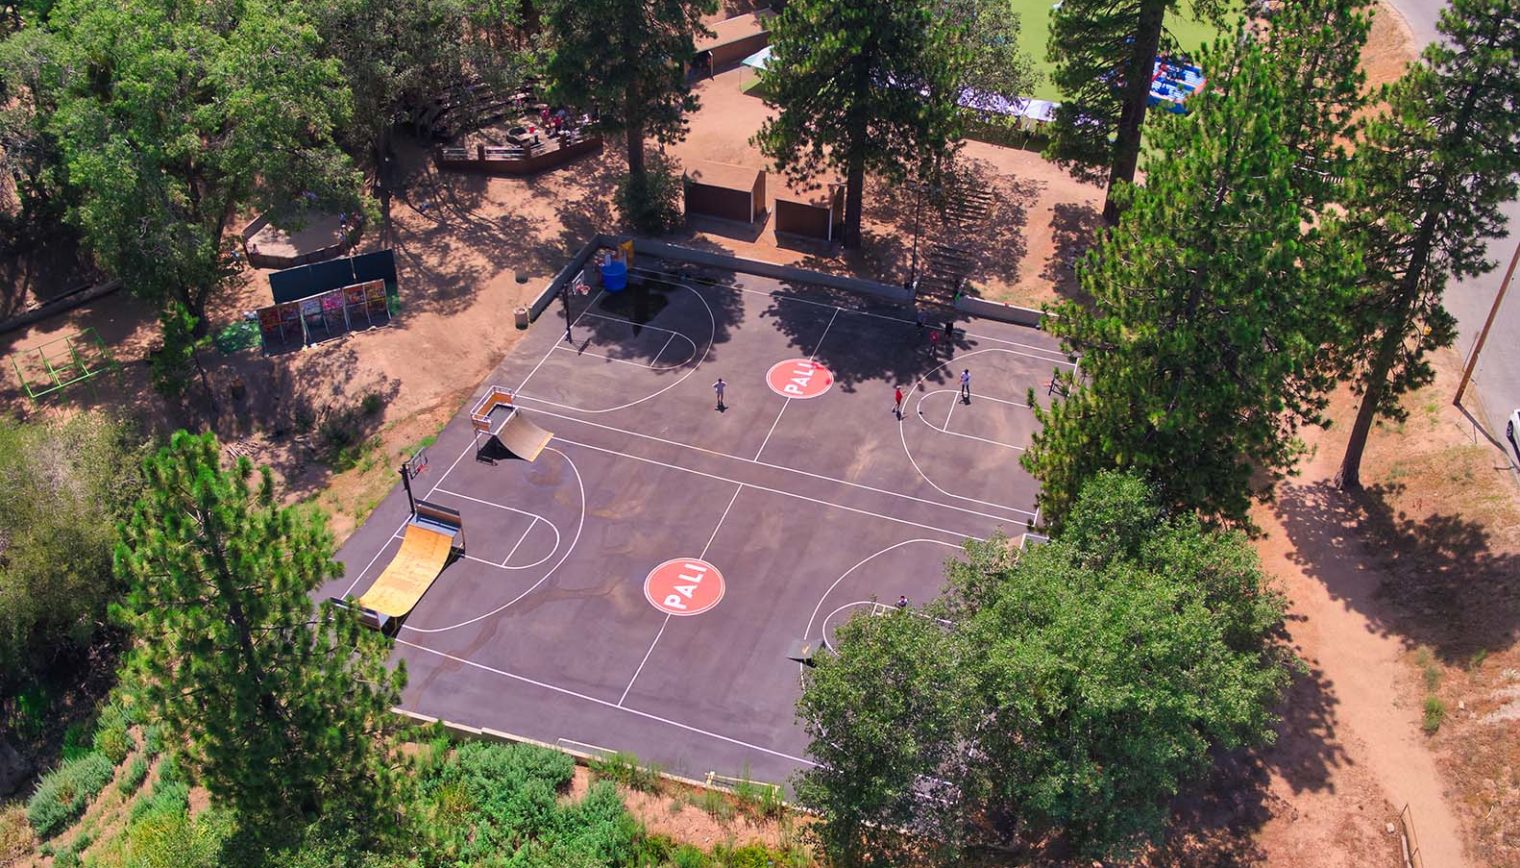 An aerial view of a basketball court.